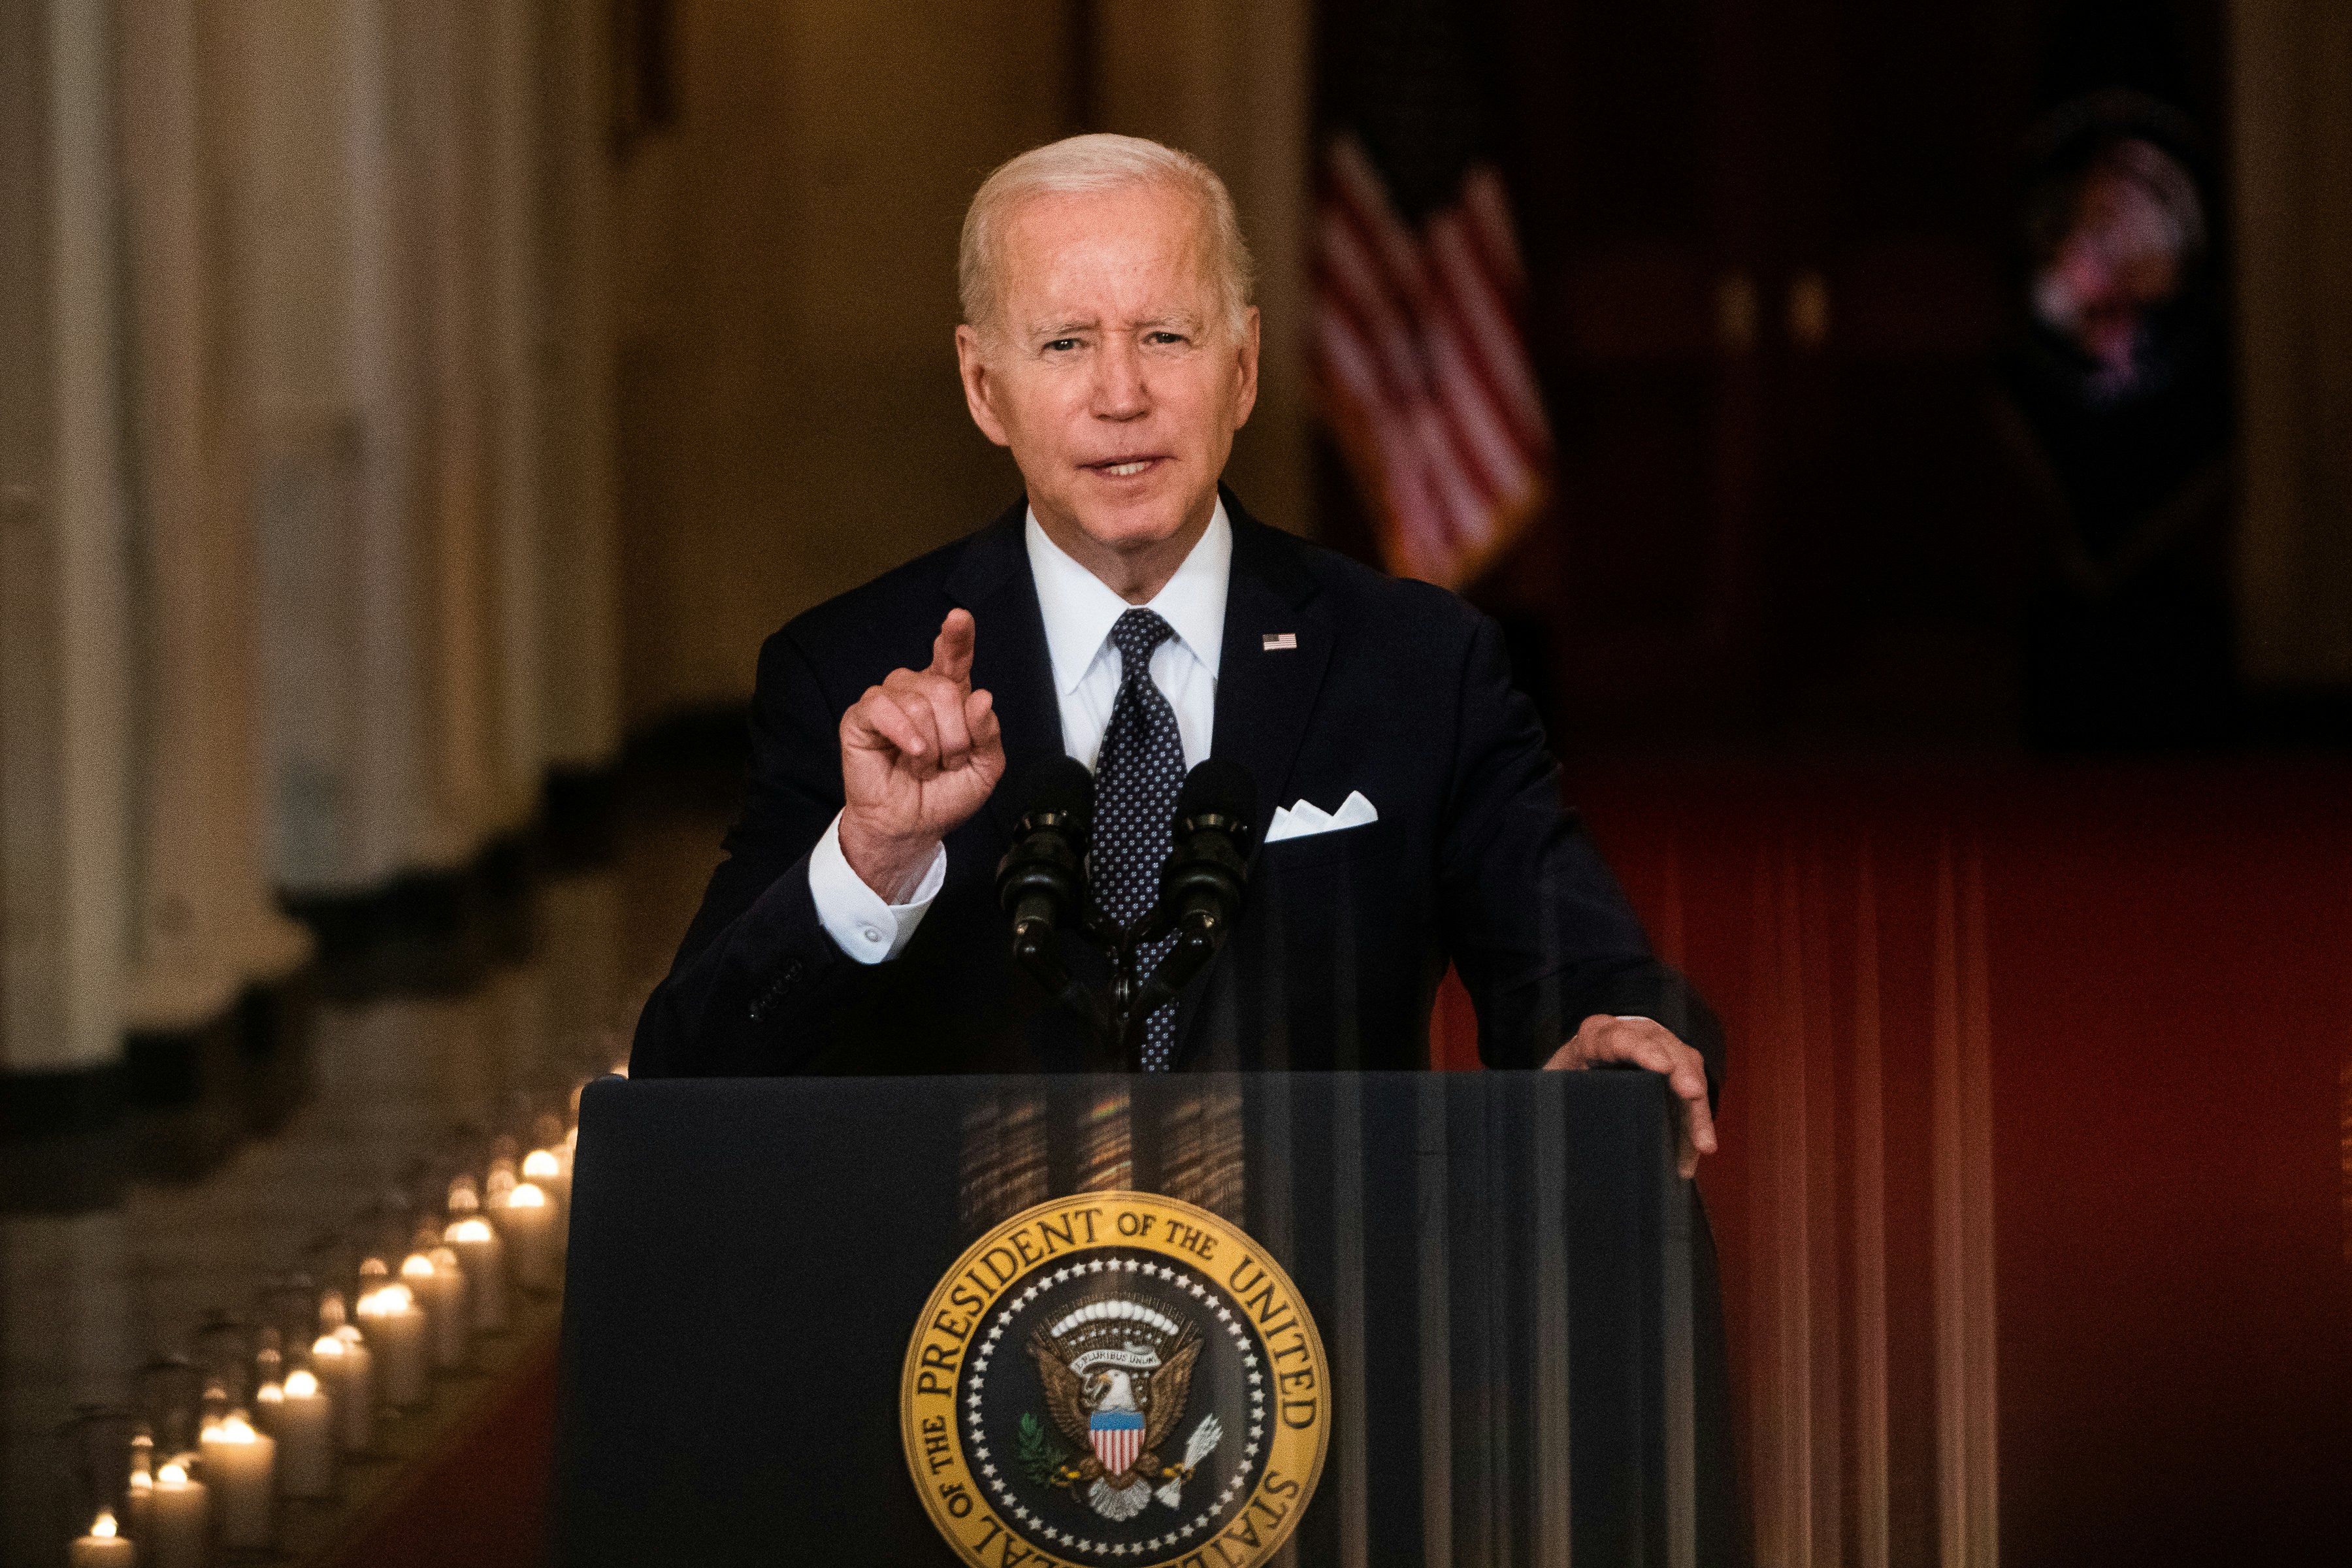 US President Joe Biden delivers remarks on the recent tragic mass shootings and the need for Congres...